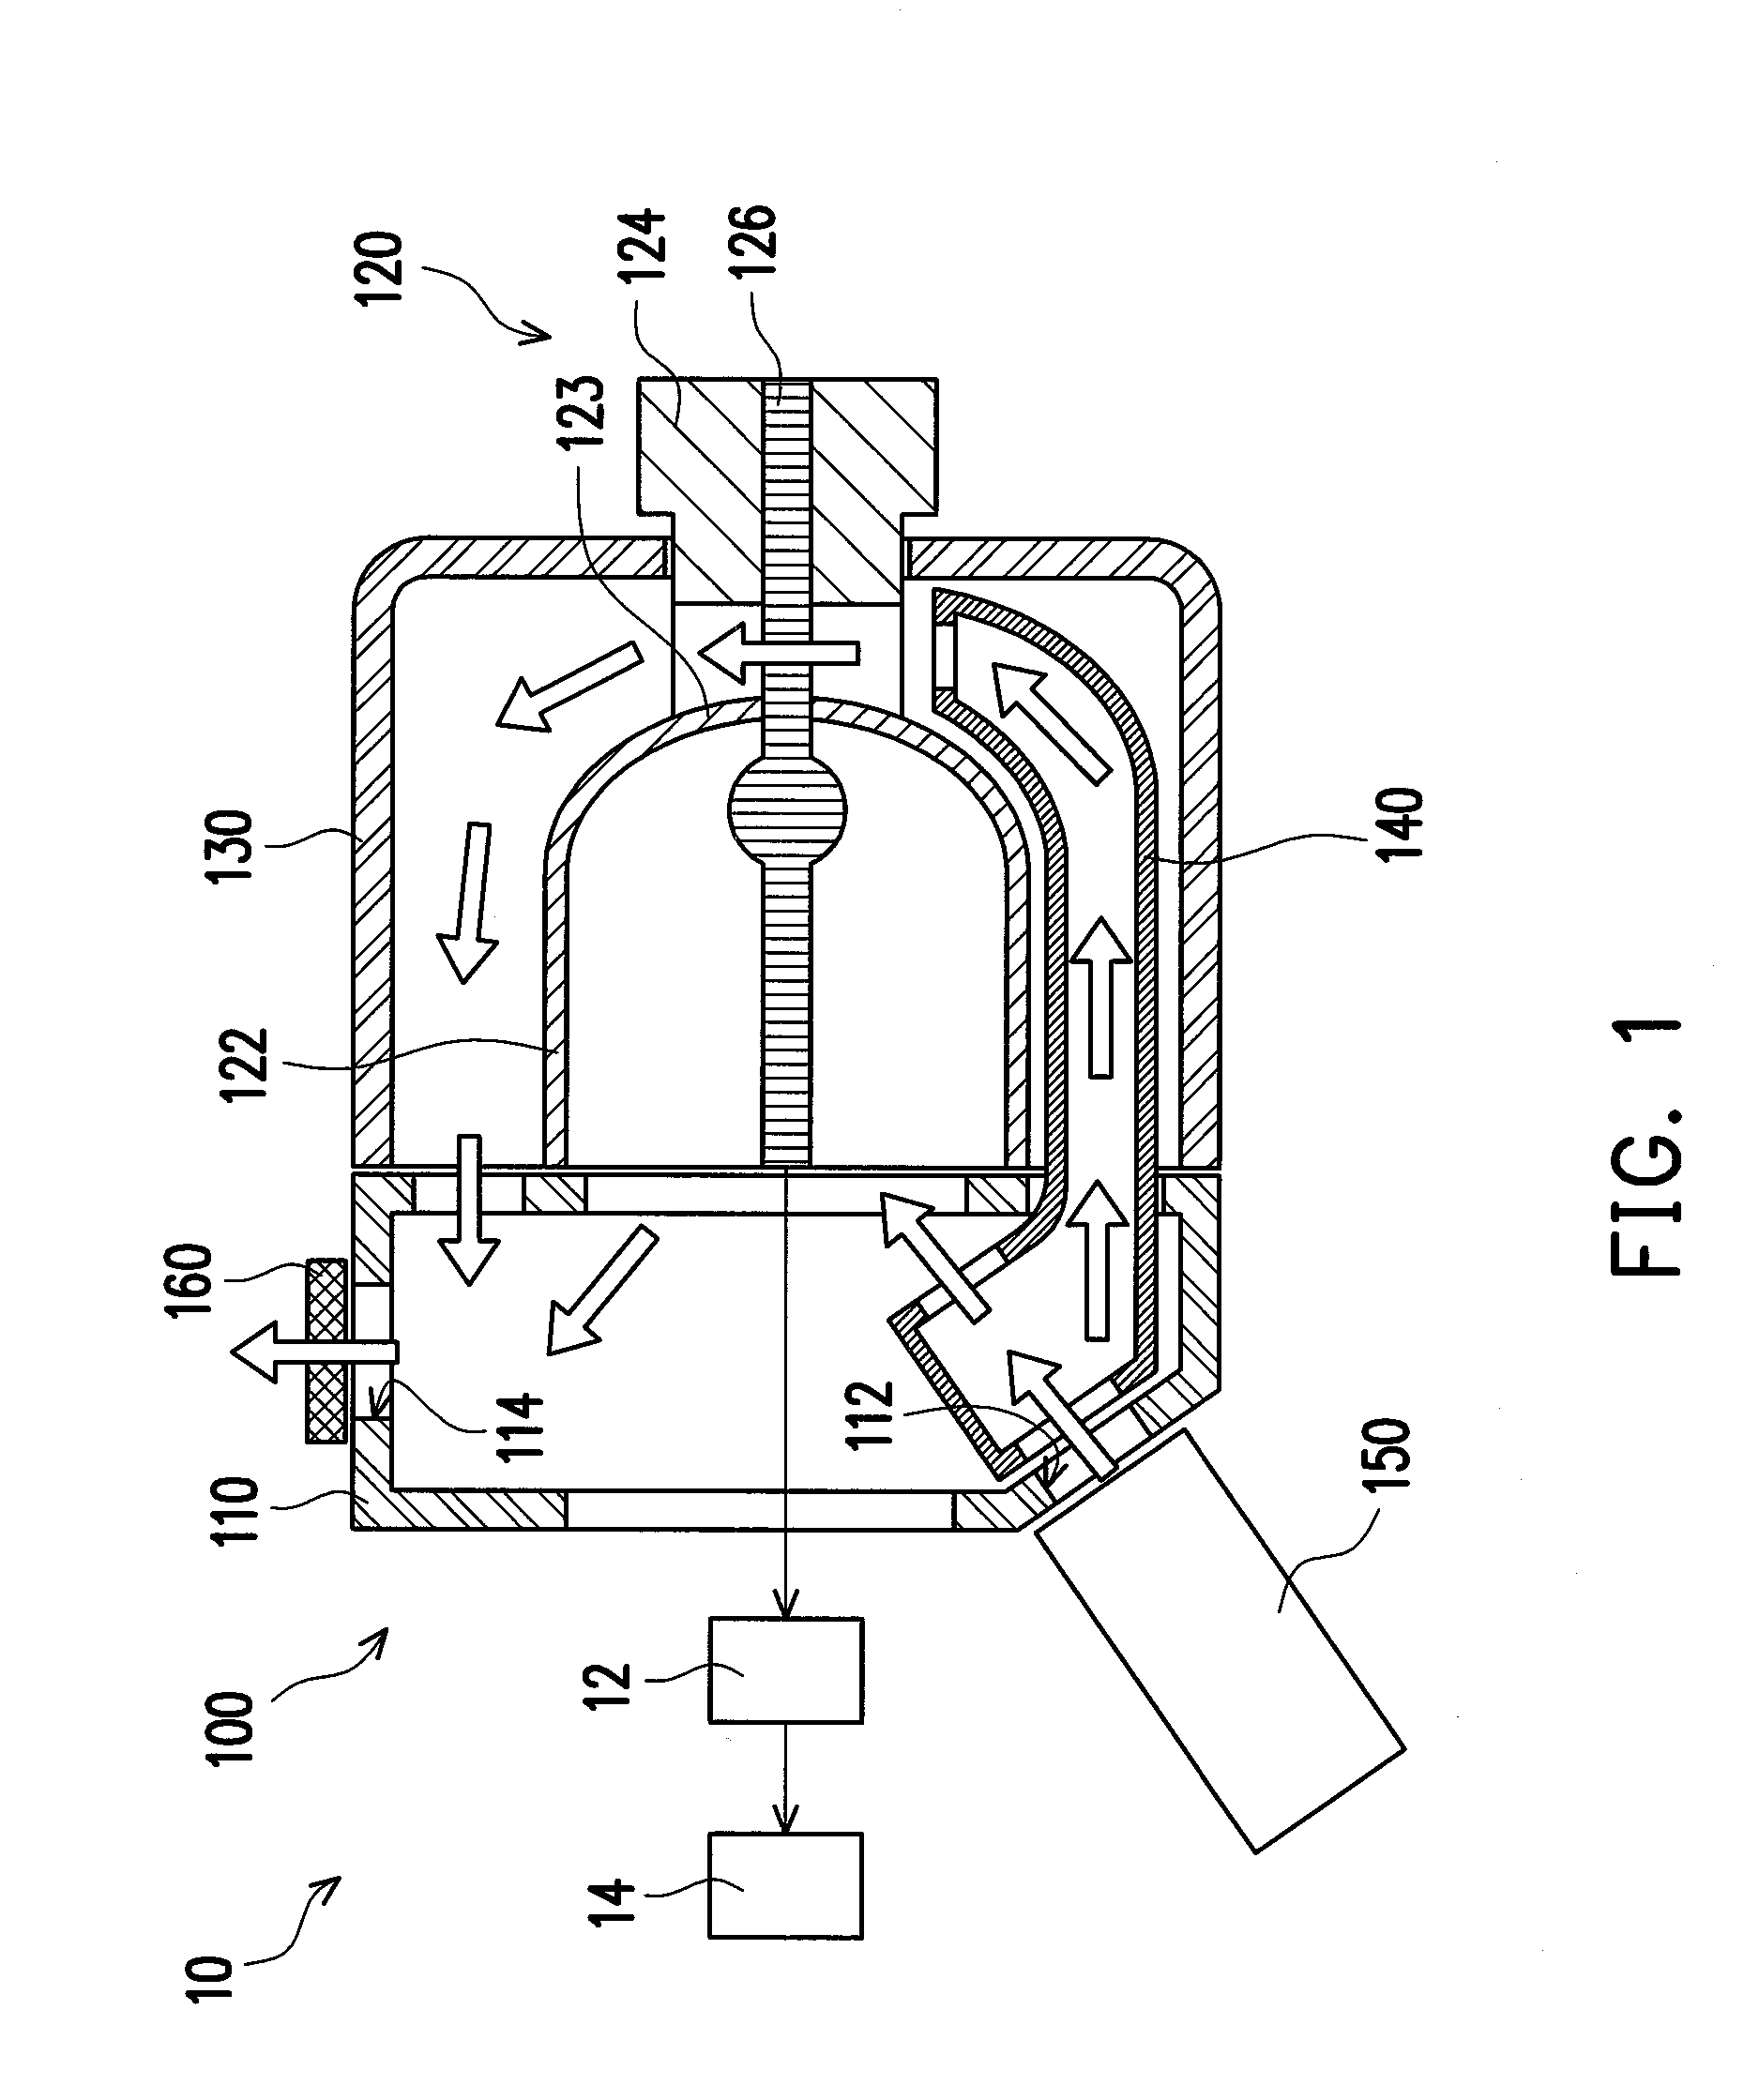 Lamp source module and projection system